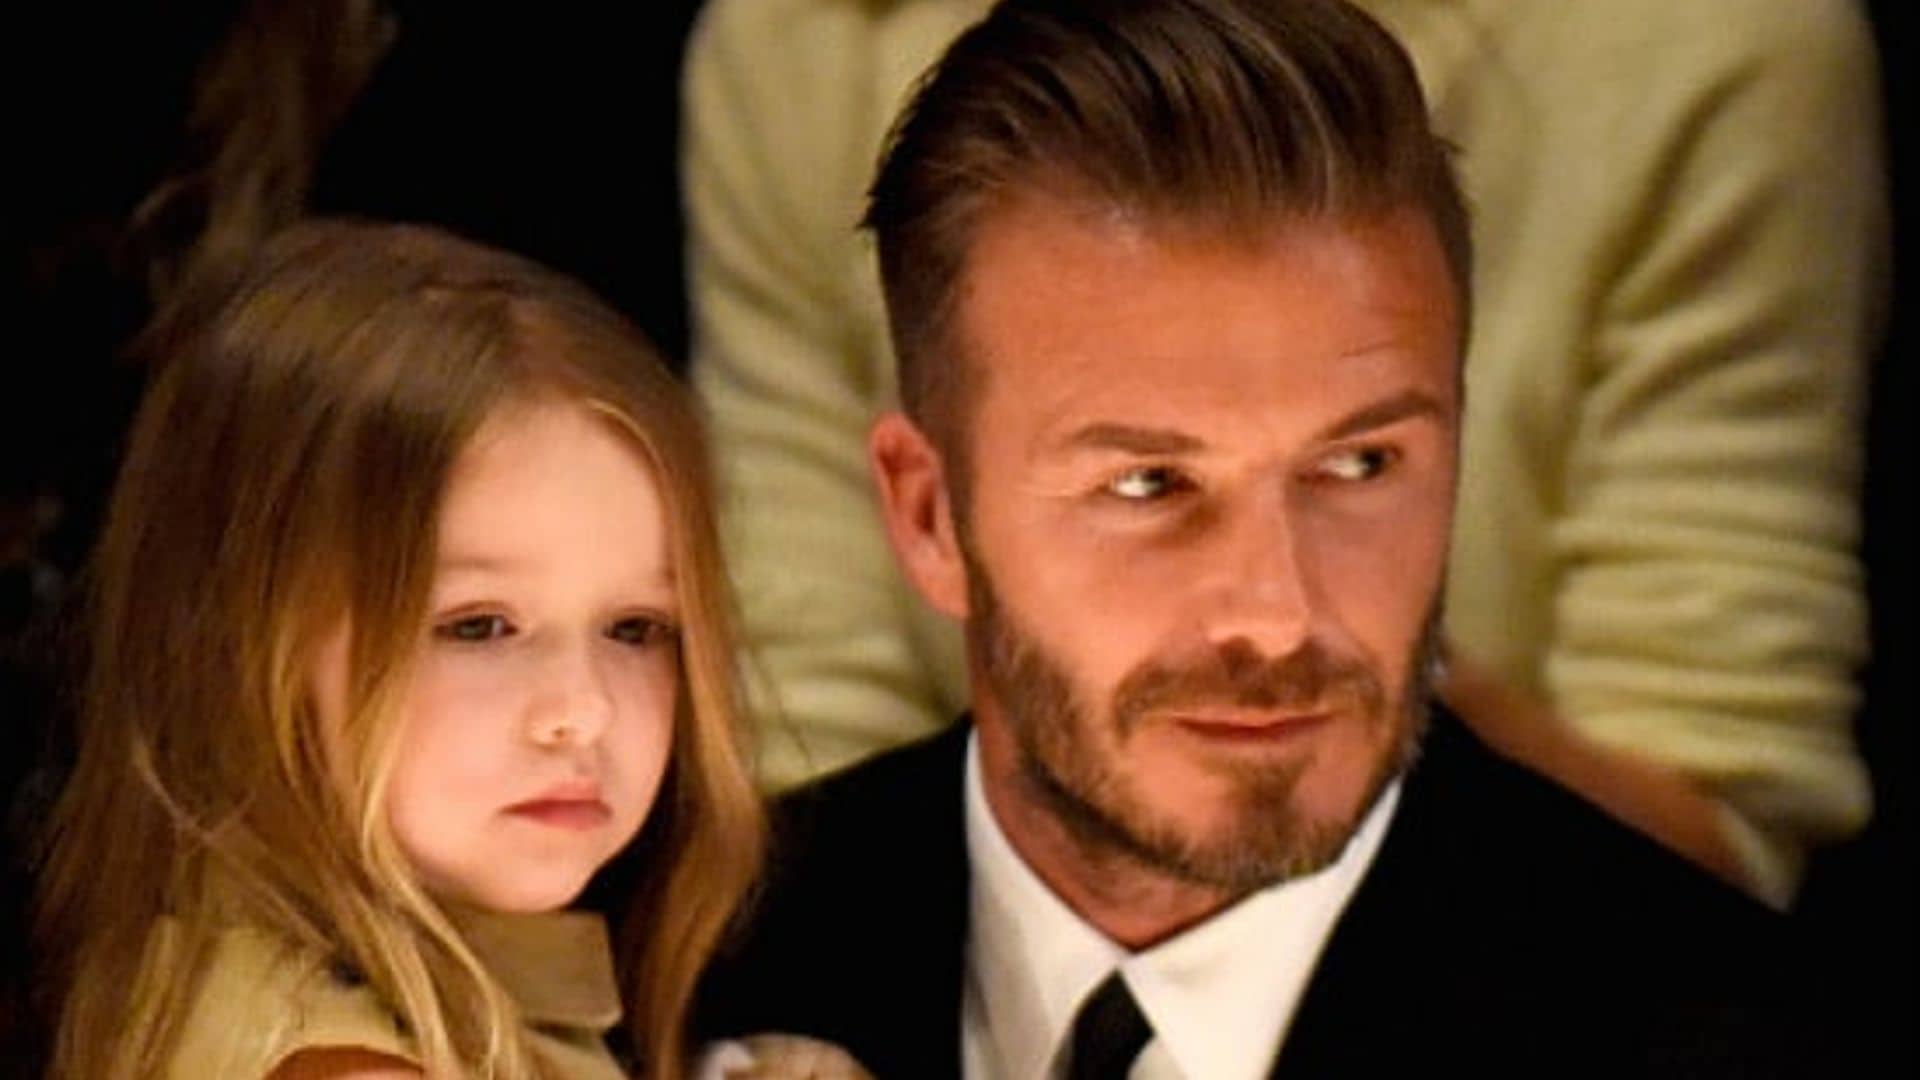 David Beckham says dating rules will 'definitely be different' for daughter Harper